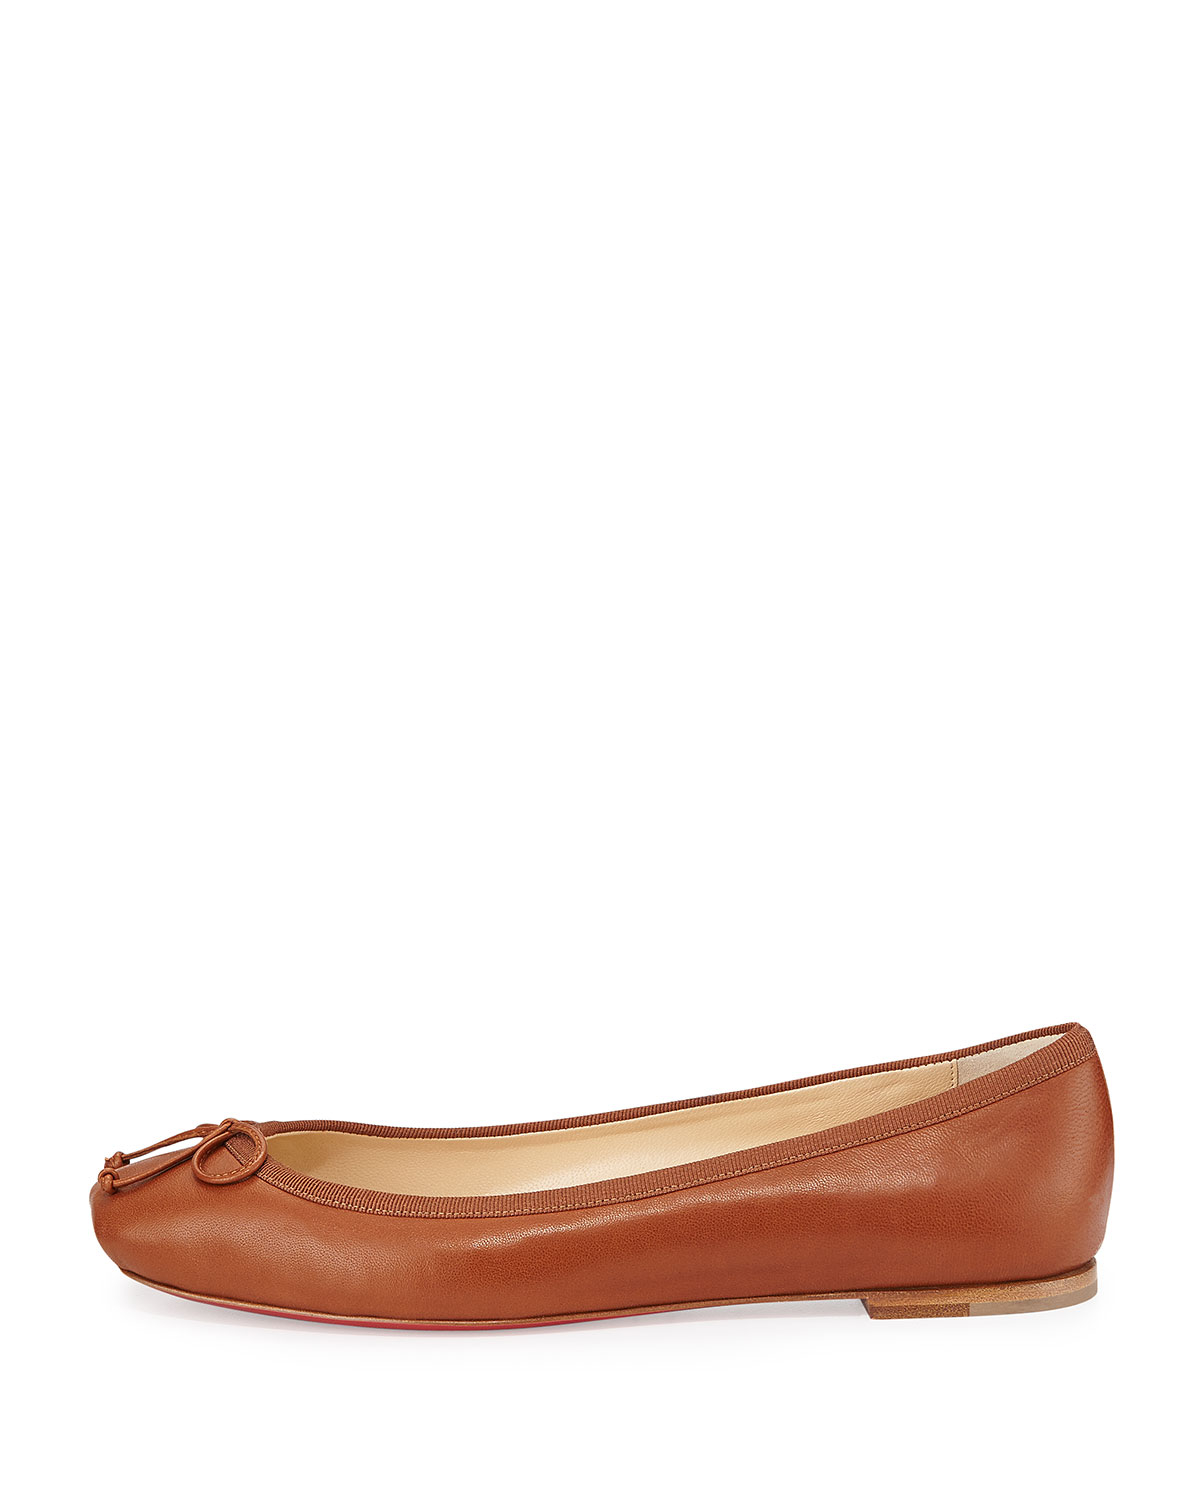 Christian louboutin Rosella Napa Leather Ballet Flat in Brown | Lyst